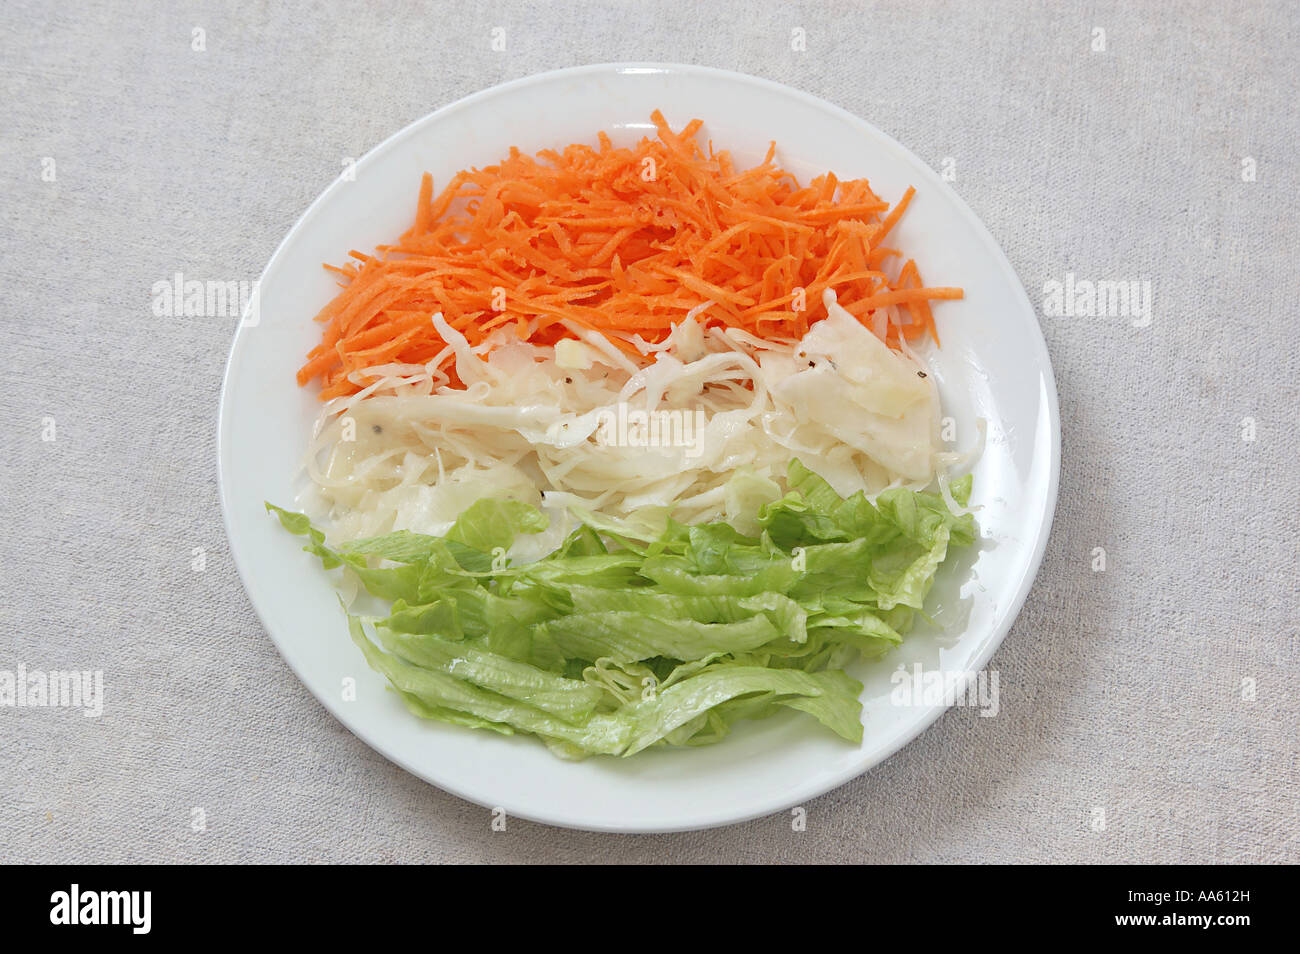 Food salad grated carrot chopped cabbage vinegar black pepper Iceberg salad chopped in round white plate looking Indian Flag Stock Photo